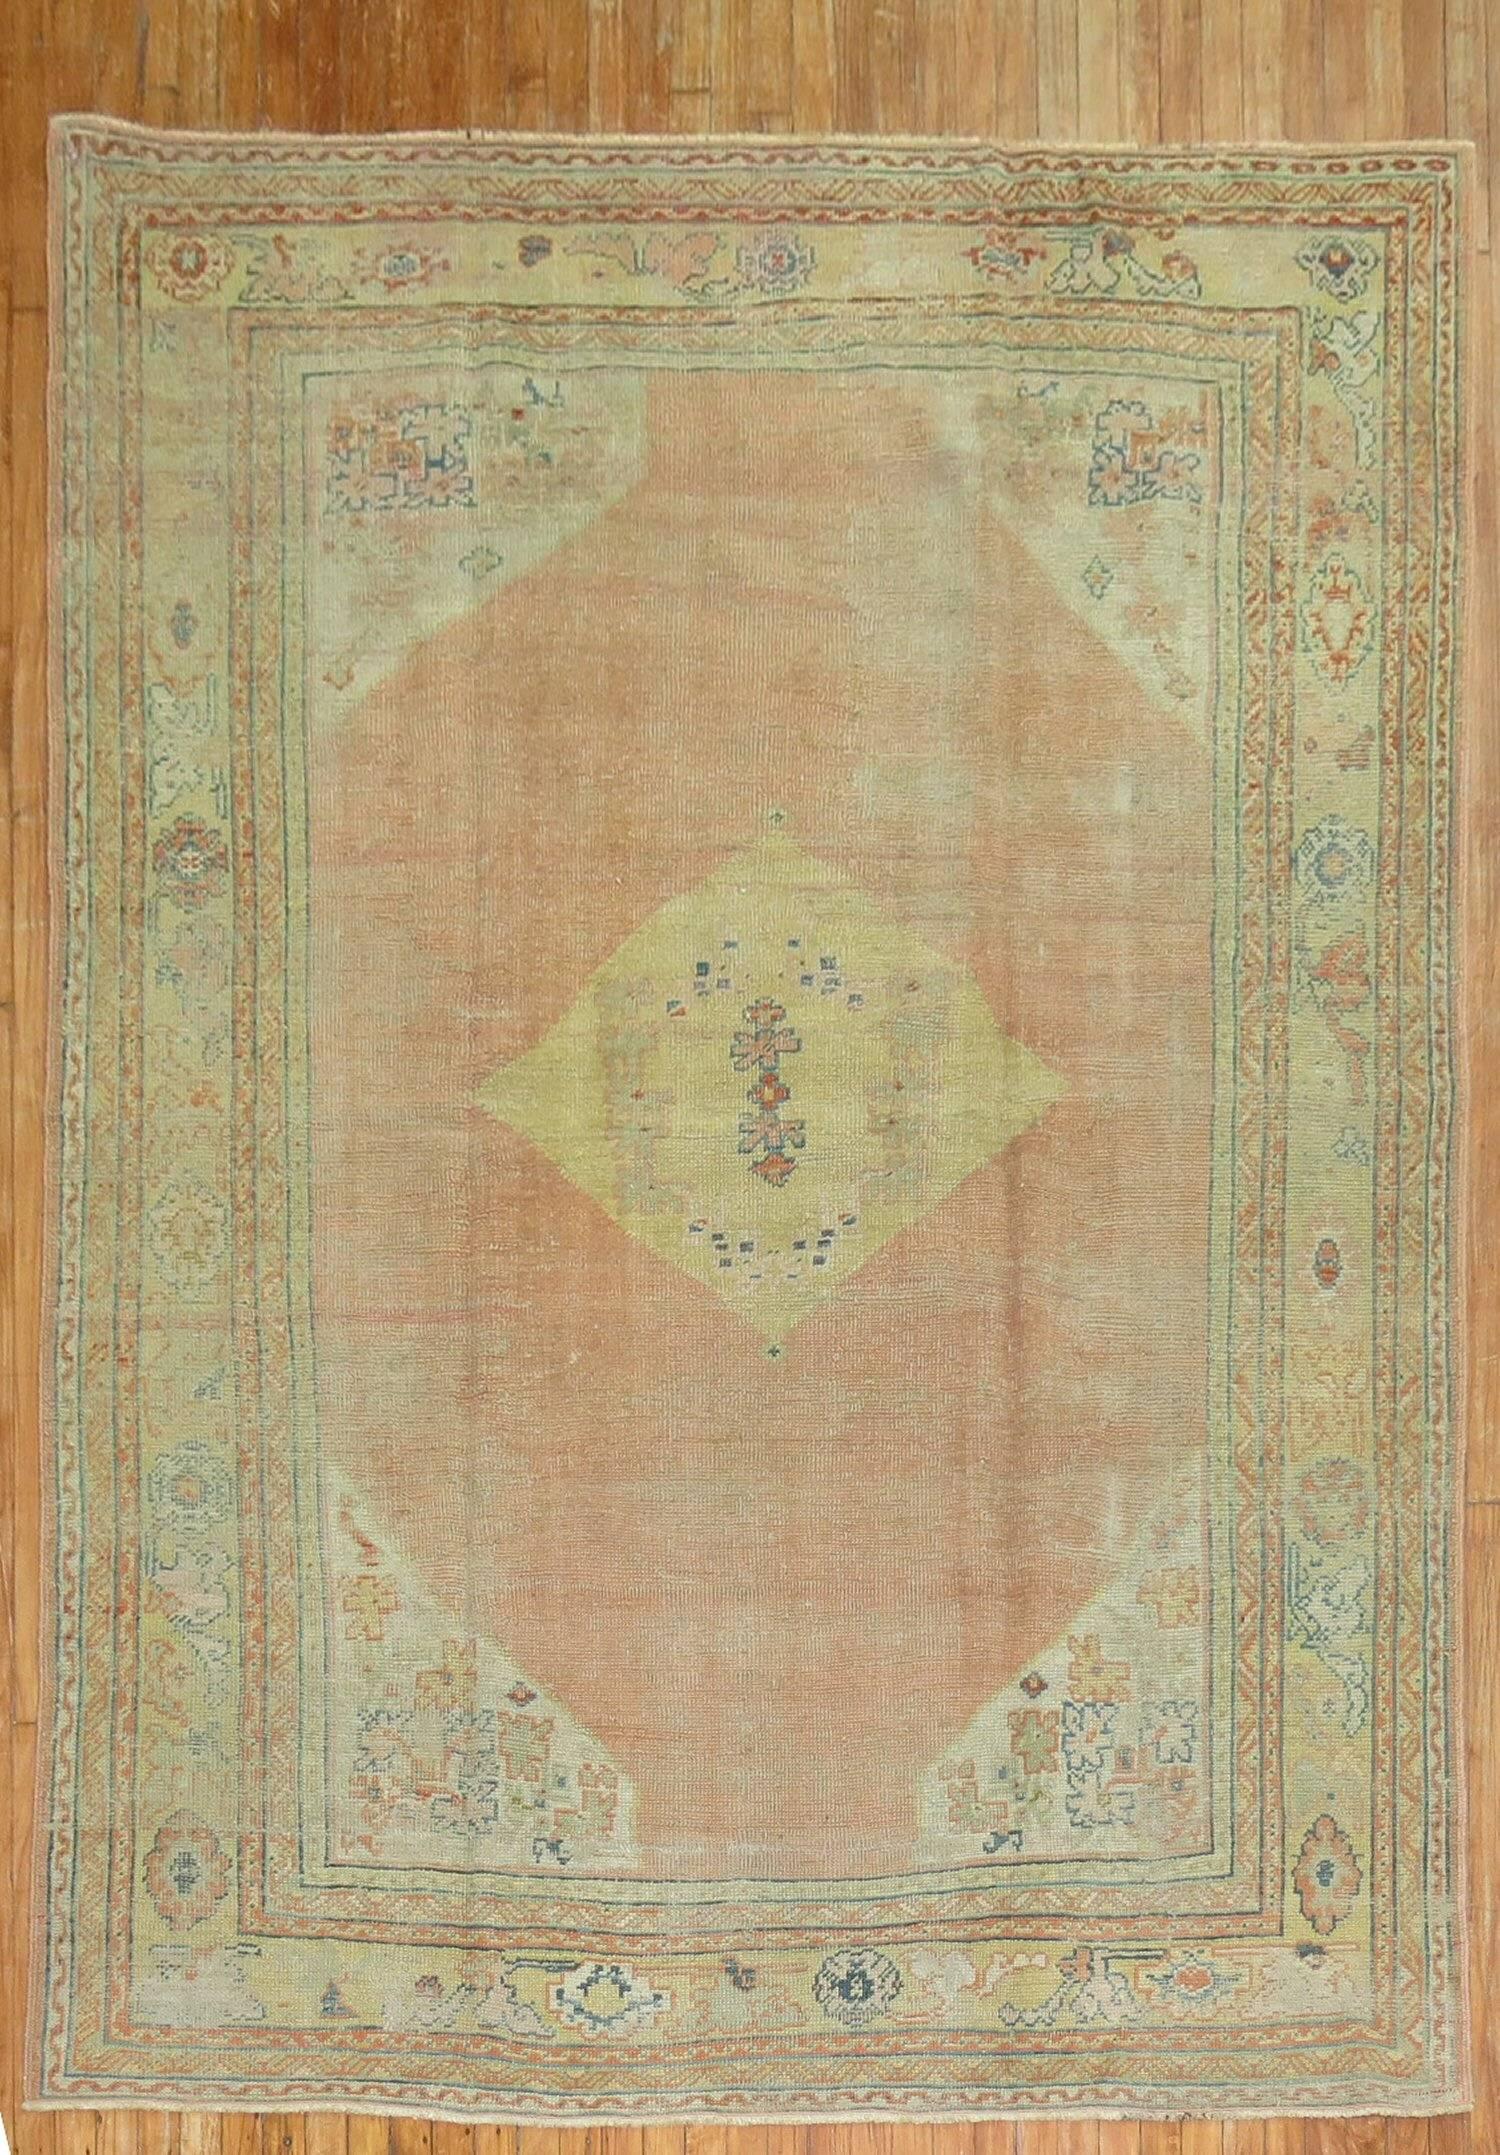 Authentic one of a kind handmade Turkish Oushak rug with a soft orange colored field and yellow medallion and border. 